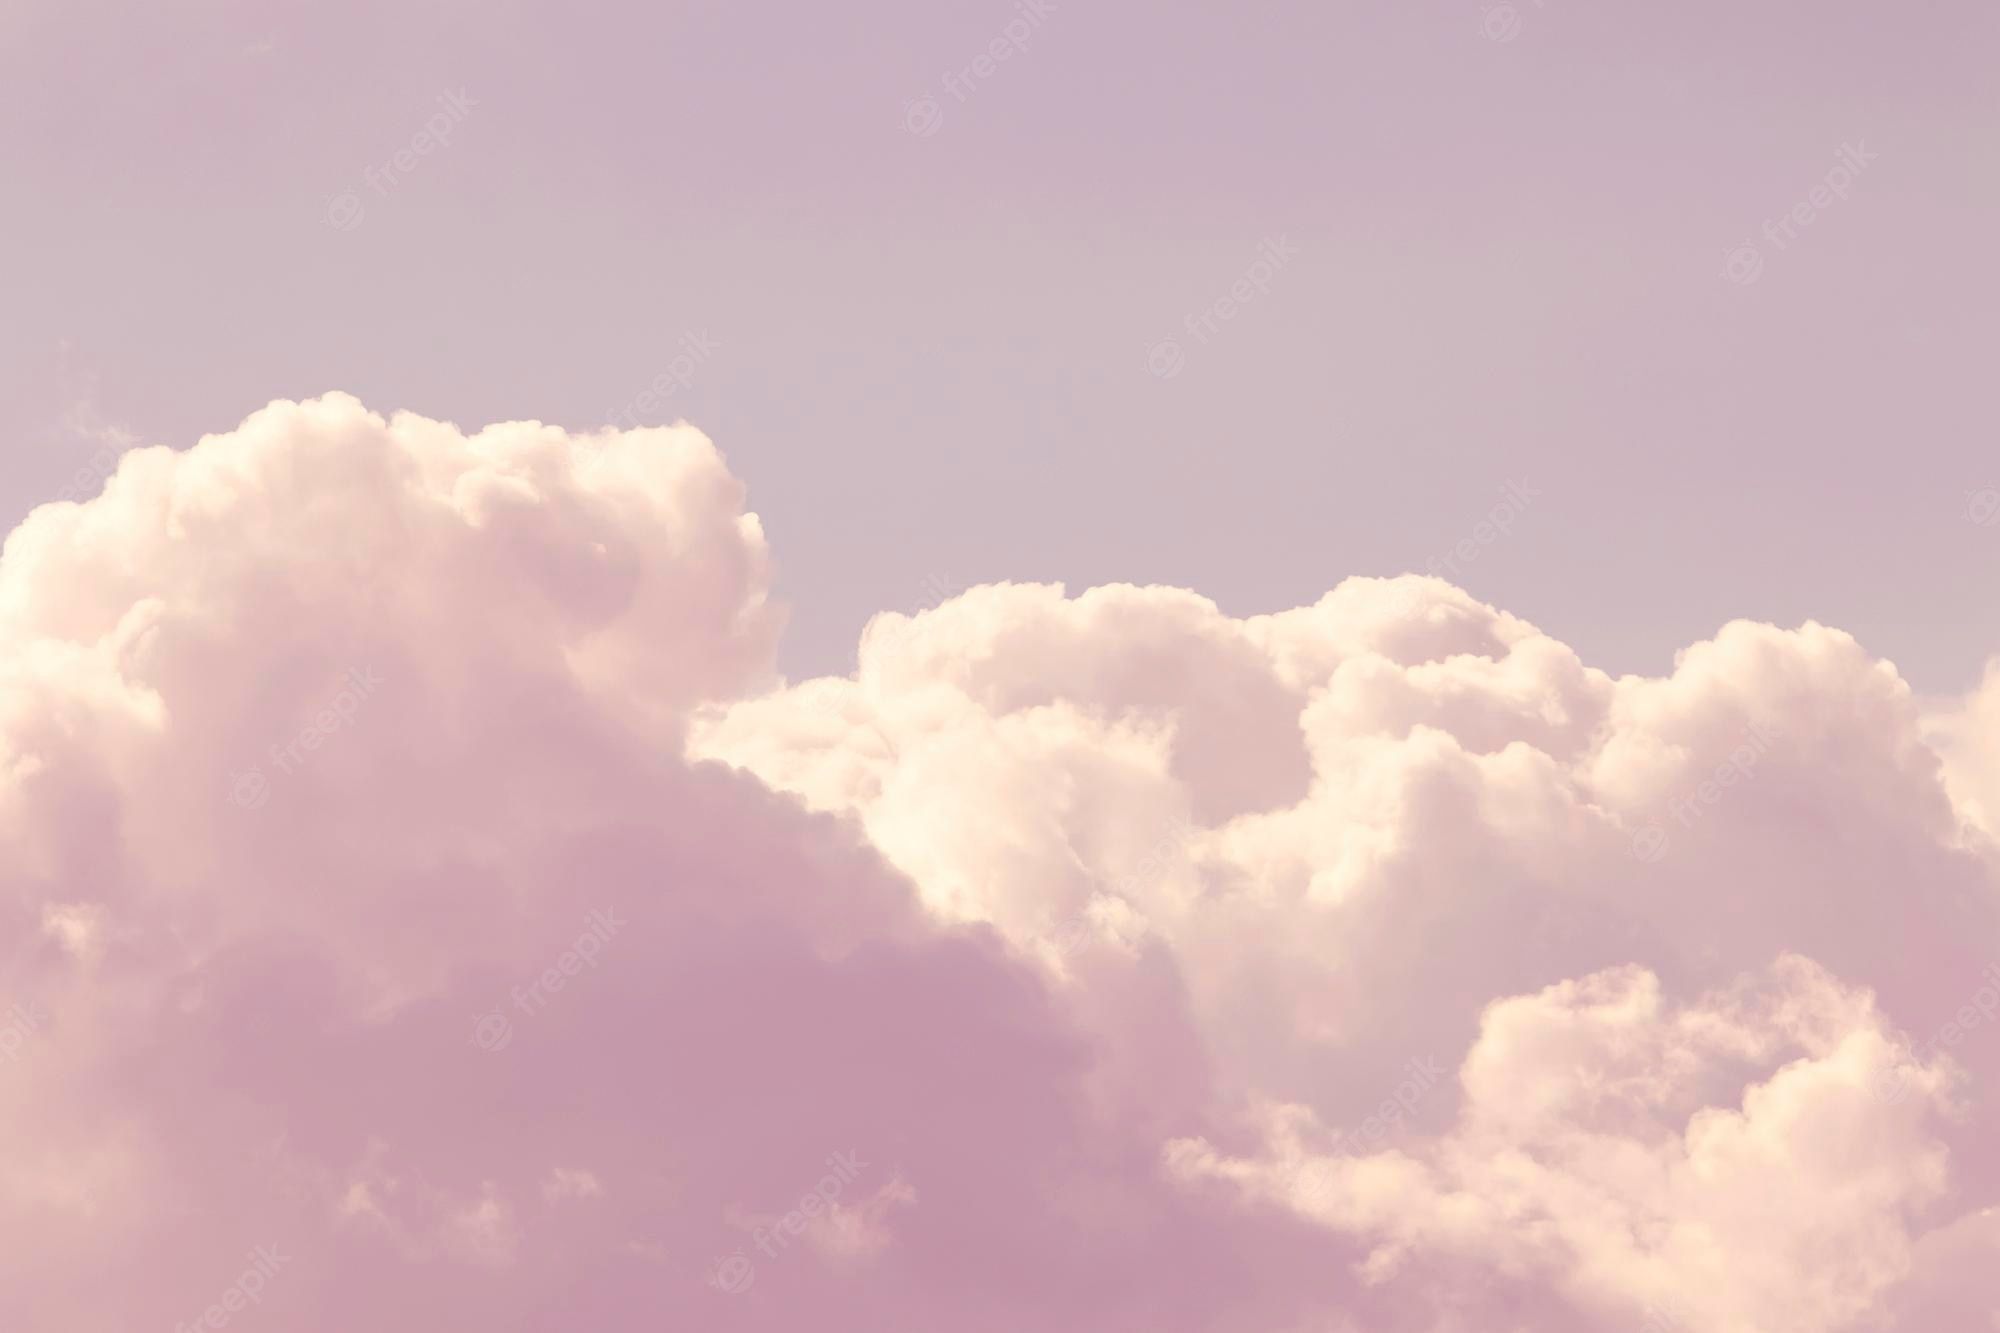 A pink and white plane flying in the sky - Cloud, vintage clouds